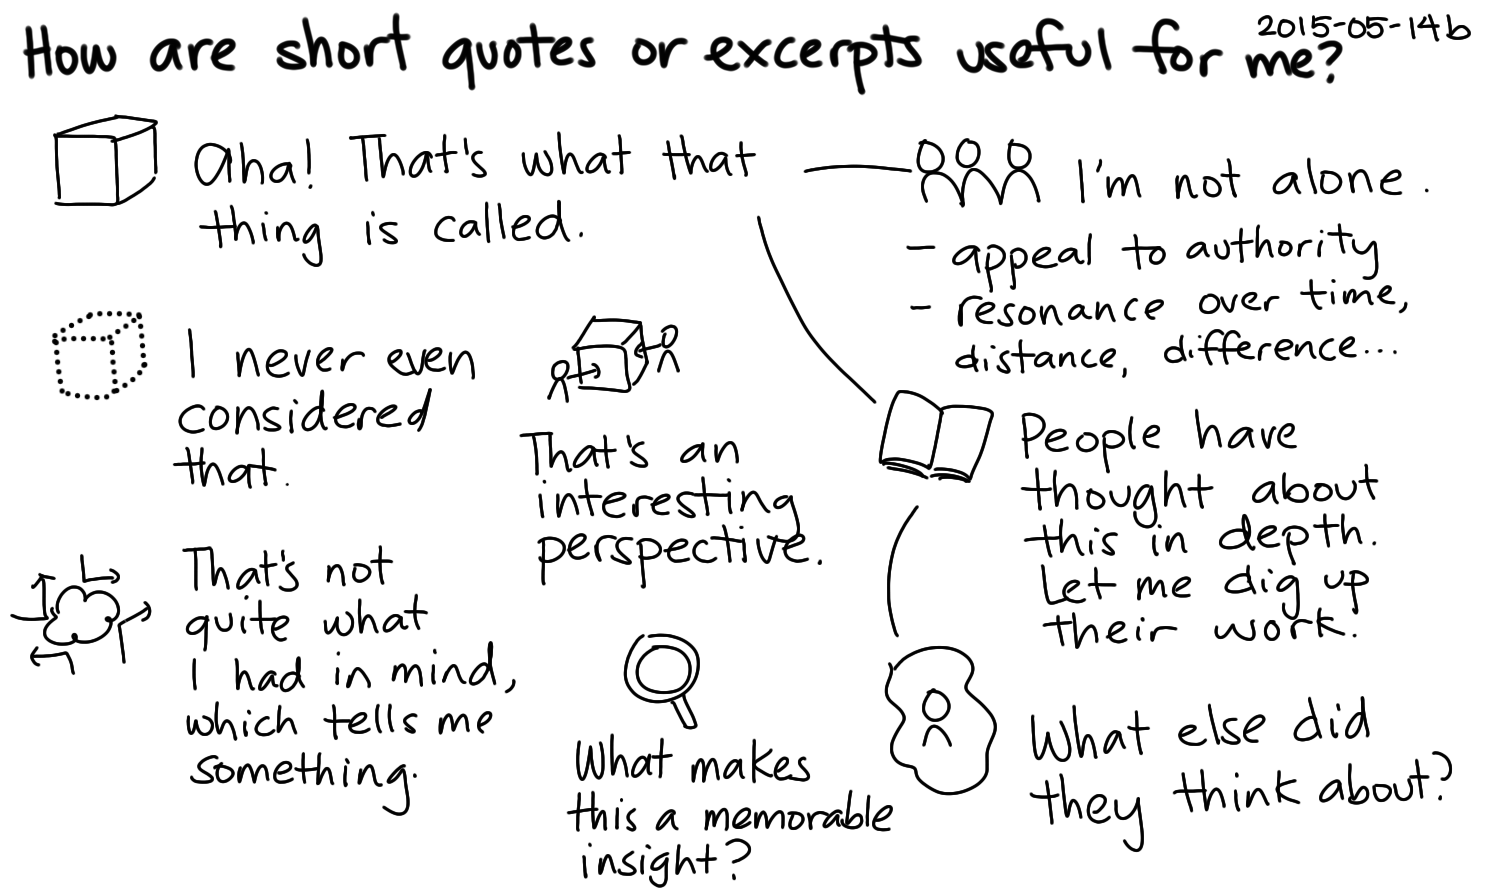 2015-05-14b How are short quotes or excerpts useful for me -- index card #blogging #sharing #perspective.png